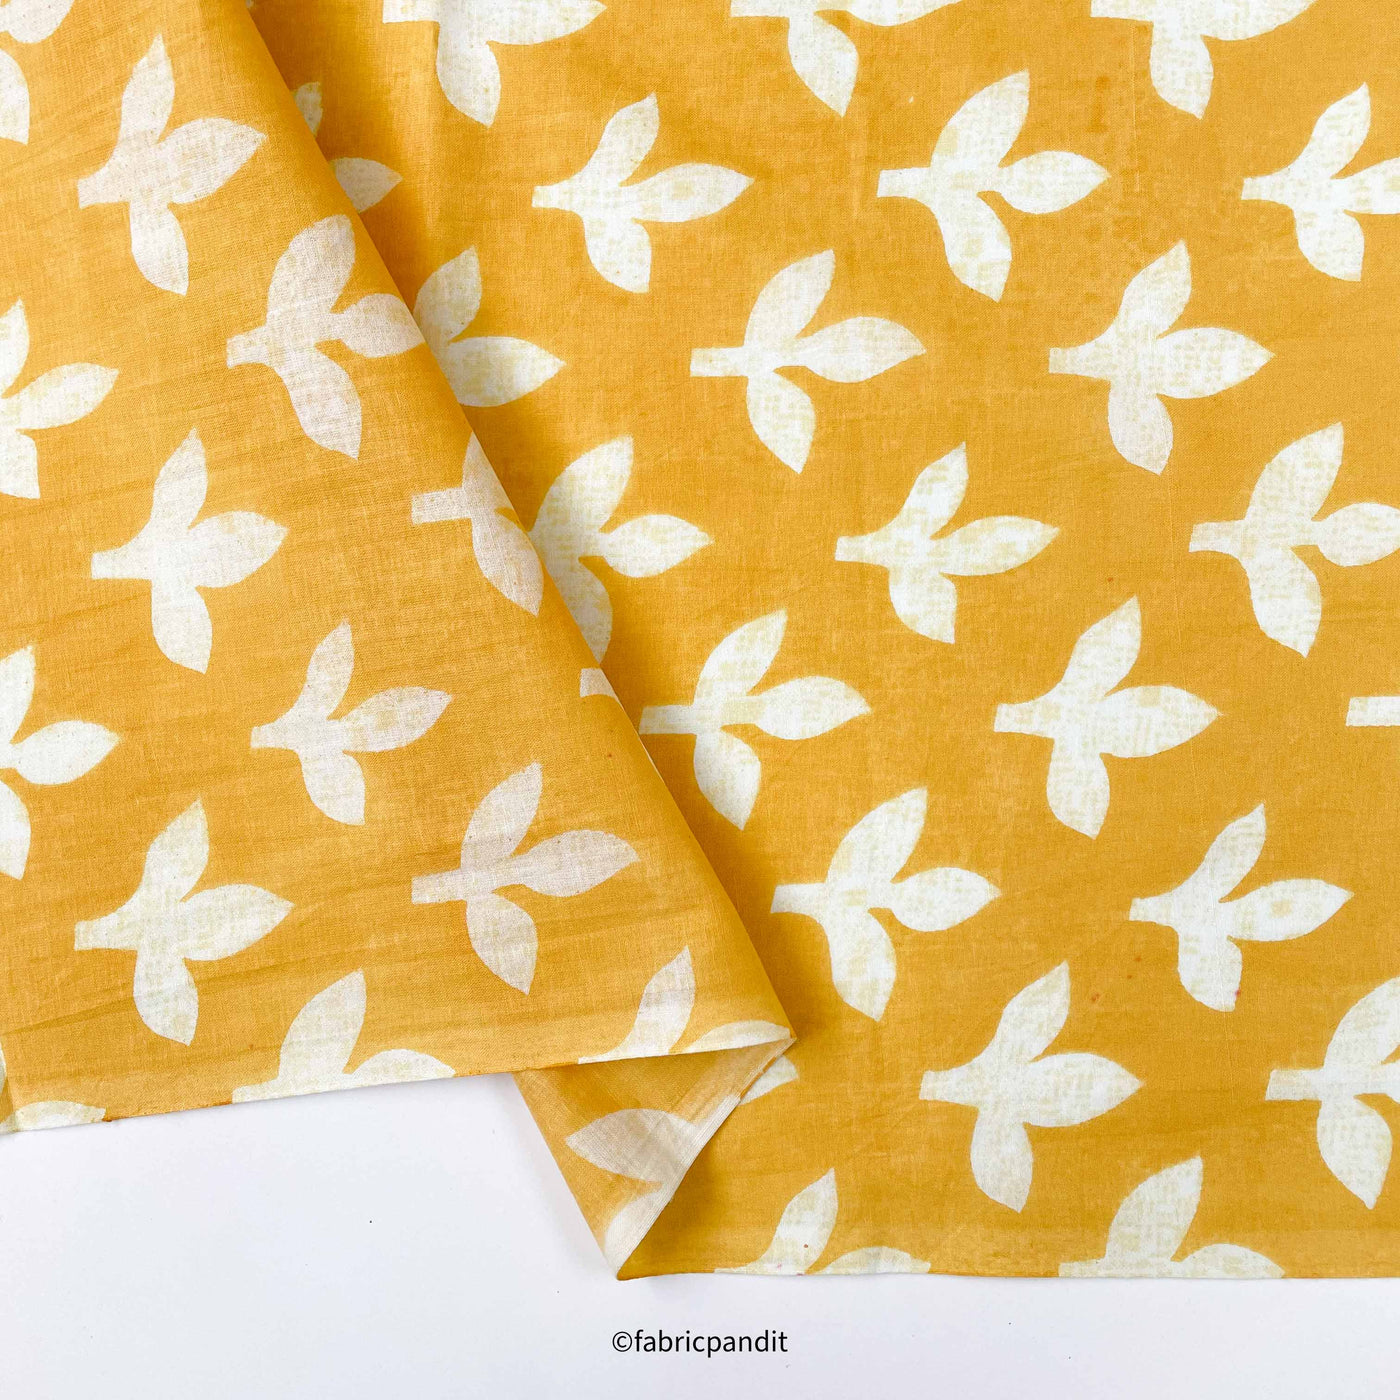 Fabric Pandit Fabric Bright Yellow & White Autumn Leaves Hand Block Printed Pure Cotton Fabric (Width 42 inches)